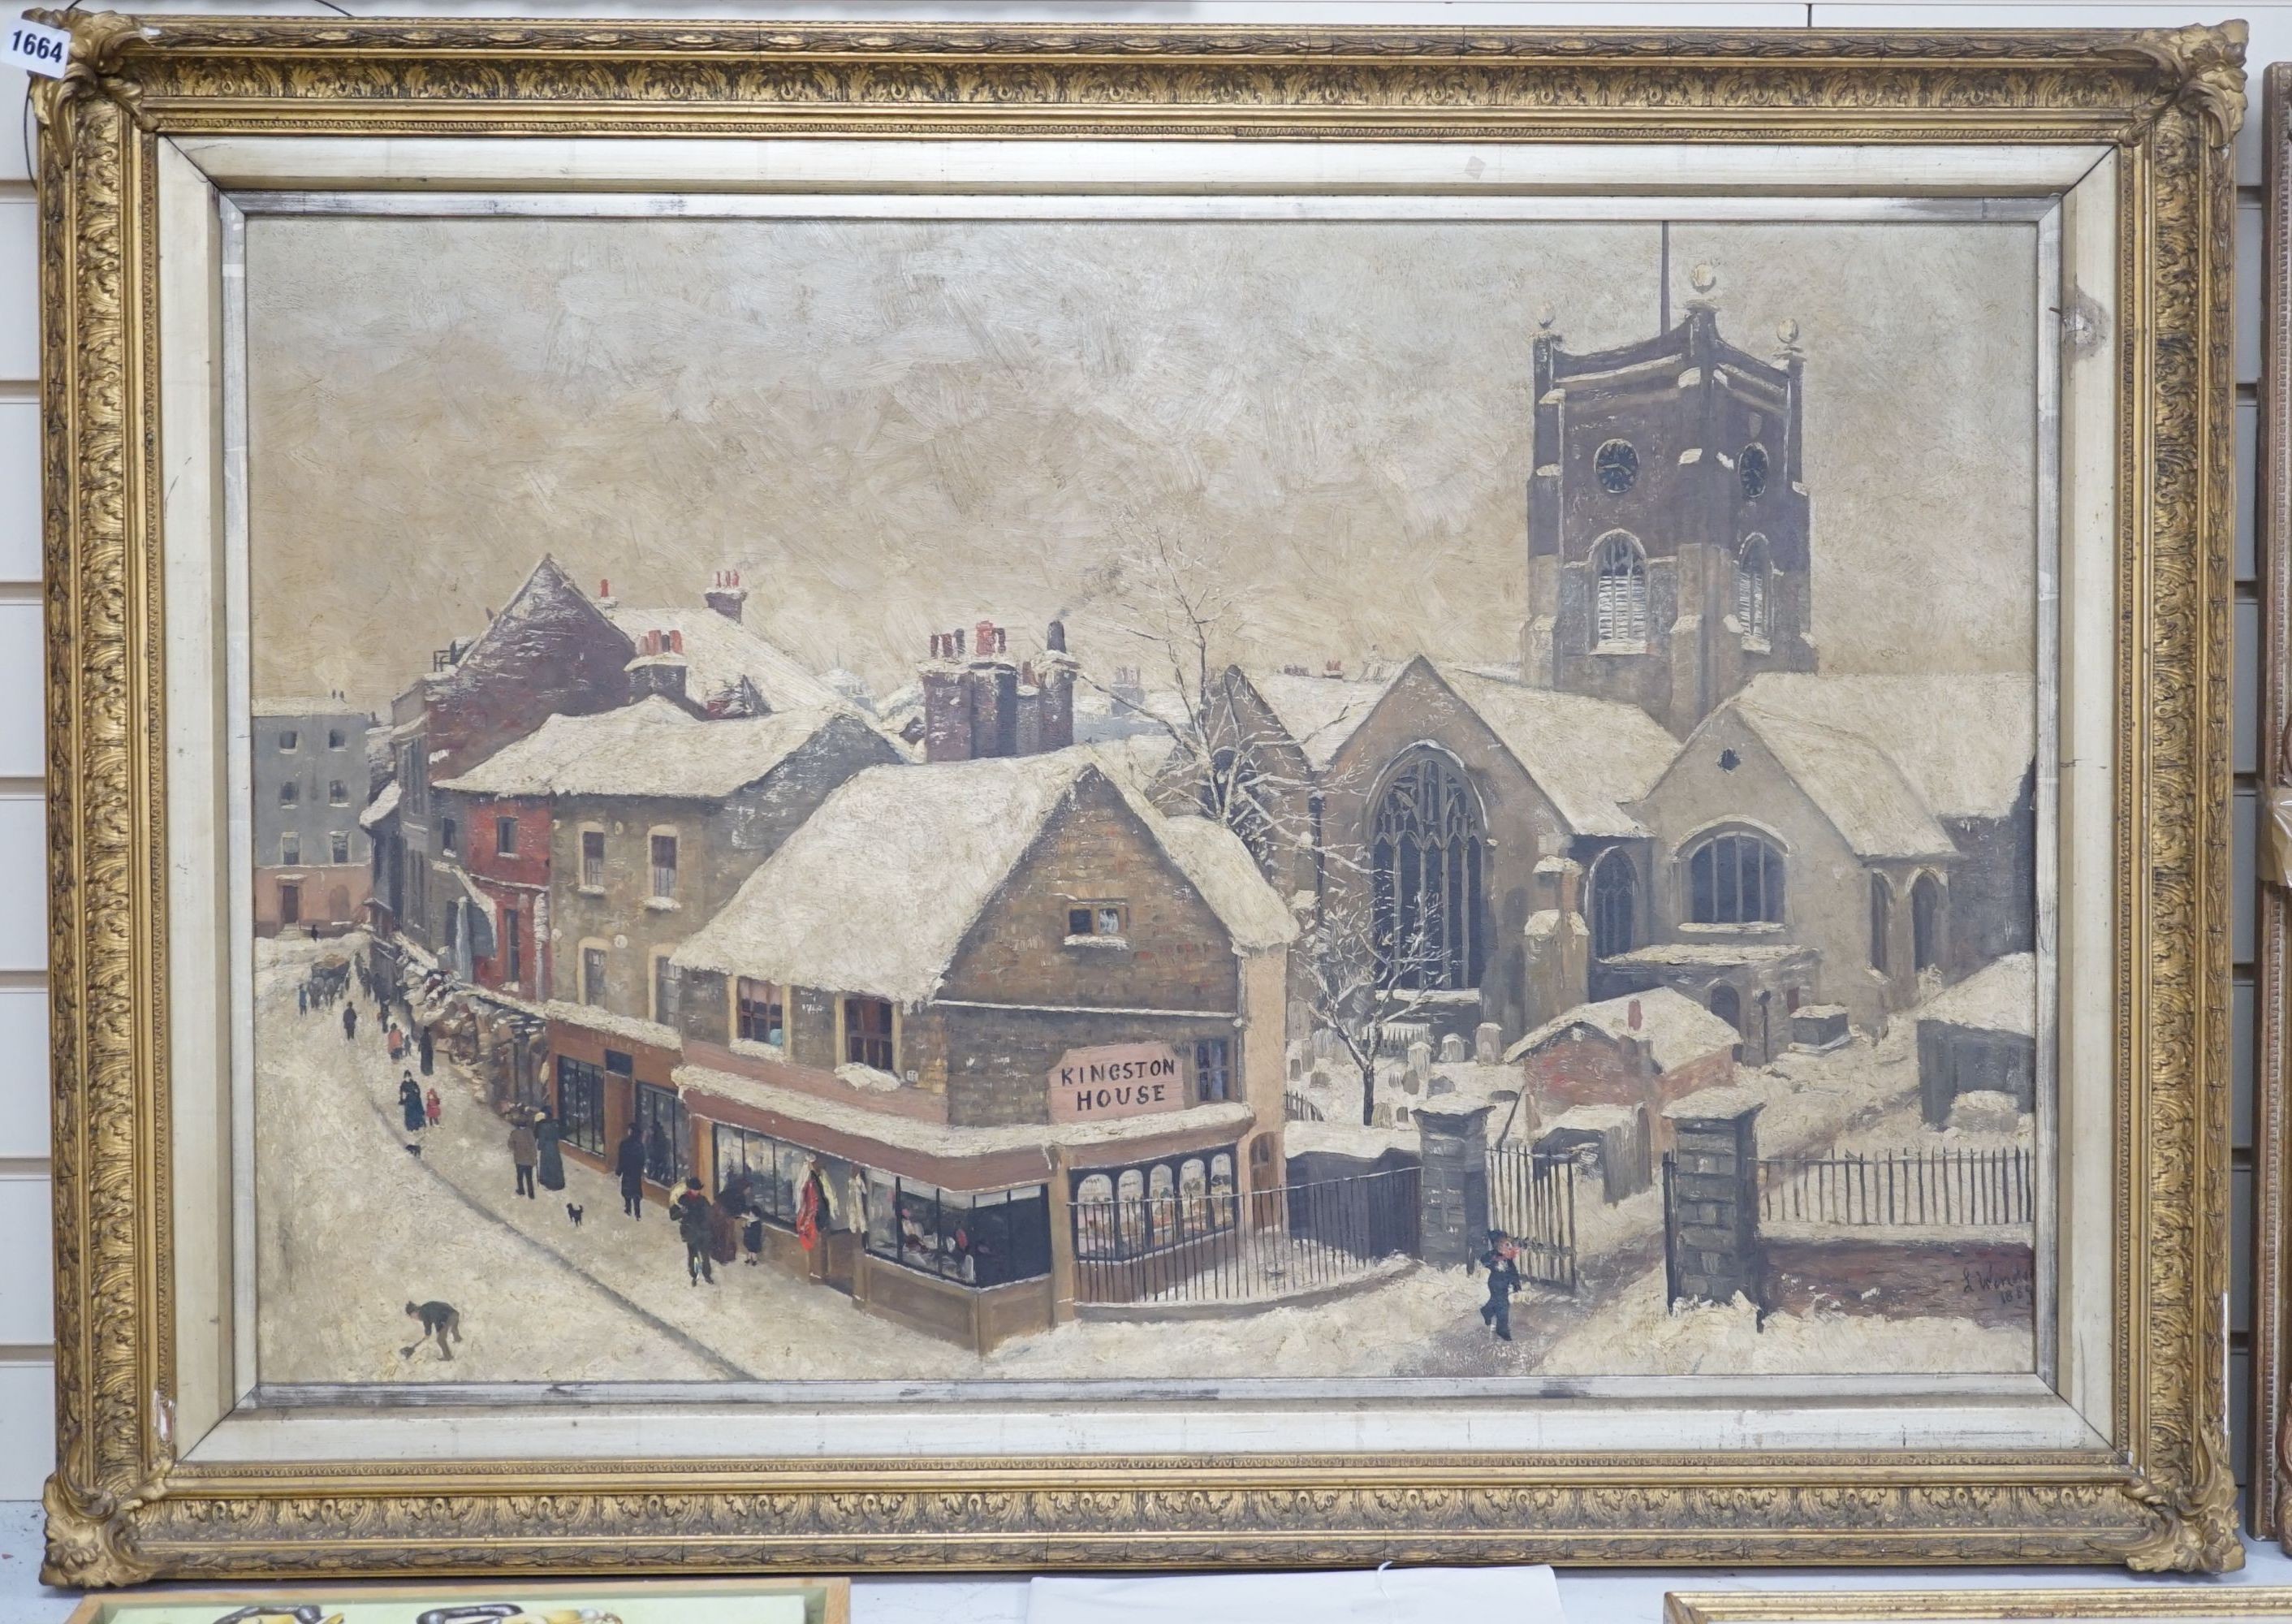 L. Windsor (19th C.), oil on canvas, Street scene under snow with Kingston House on the corner, signed and dated 1889, 58 x 89cm